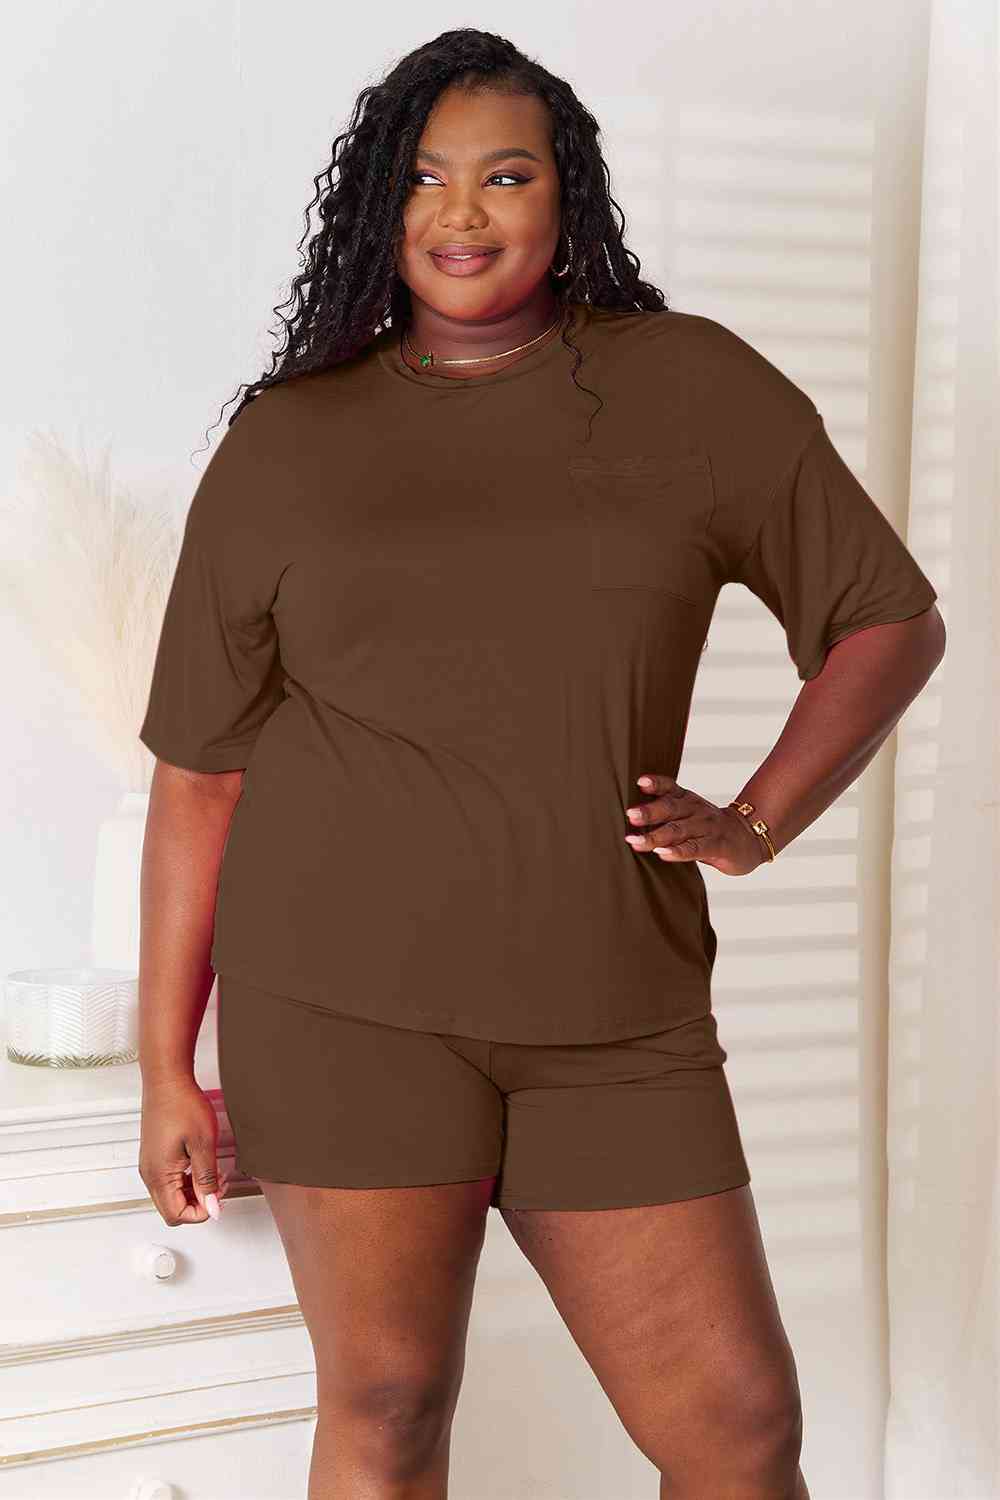 Women's Half Sleeve Oversized Top and Shorts Set with Pockets